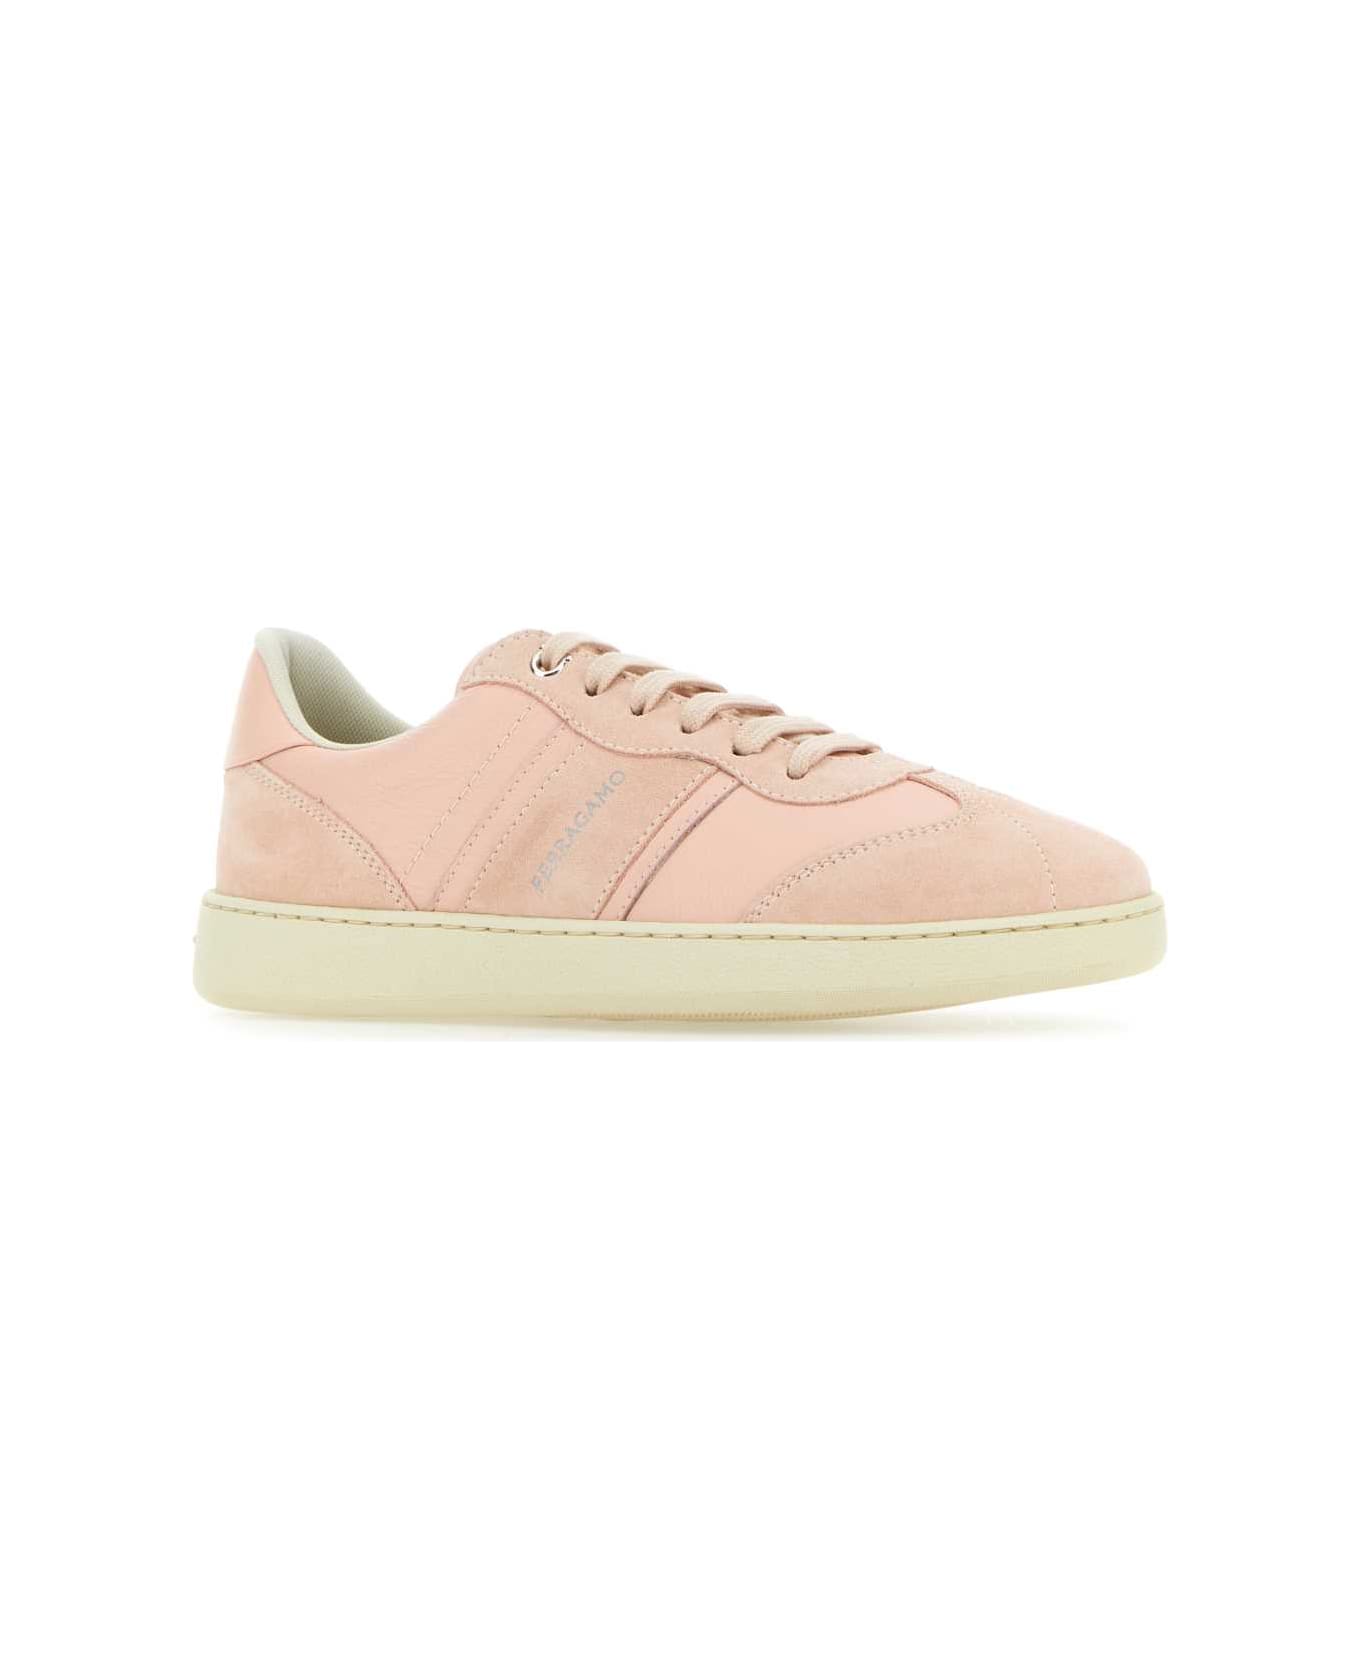 Ferragamo Pink Leather Sneakers - NYLUNDPINK